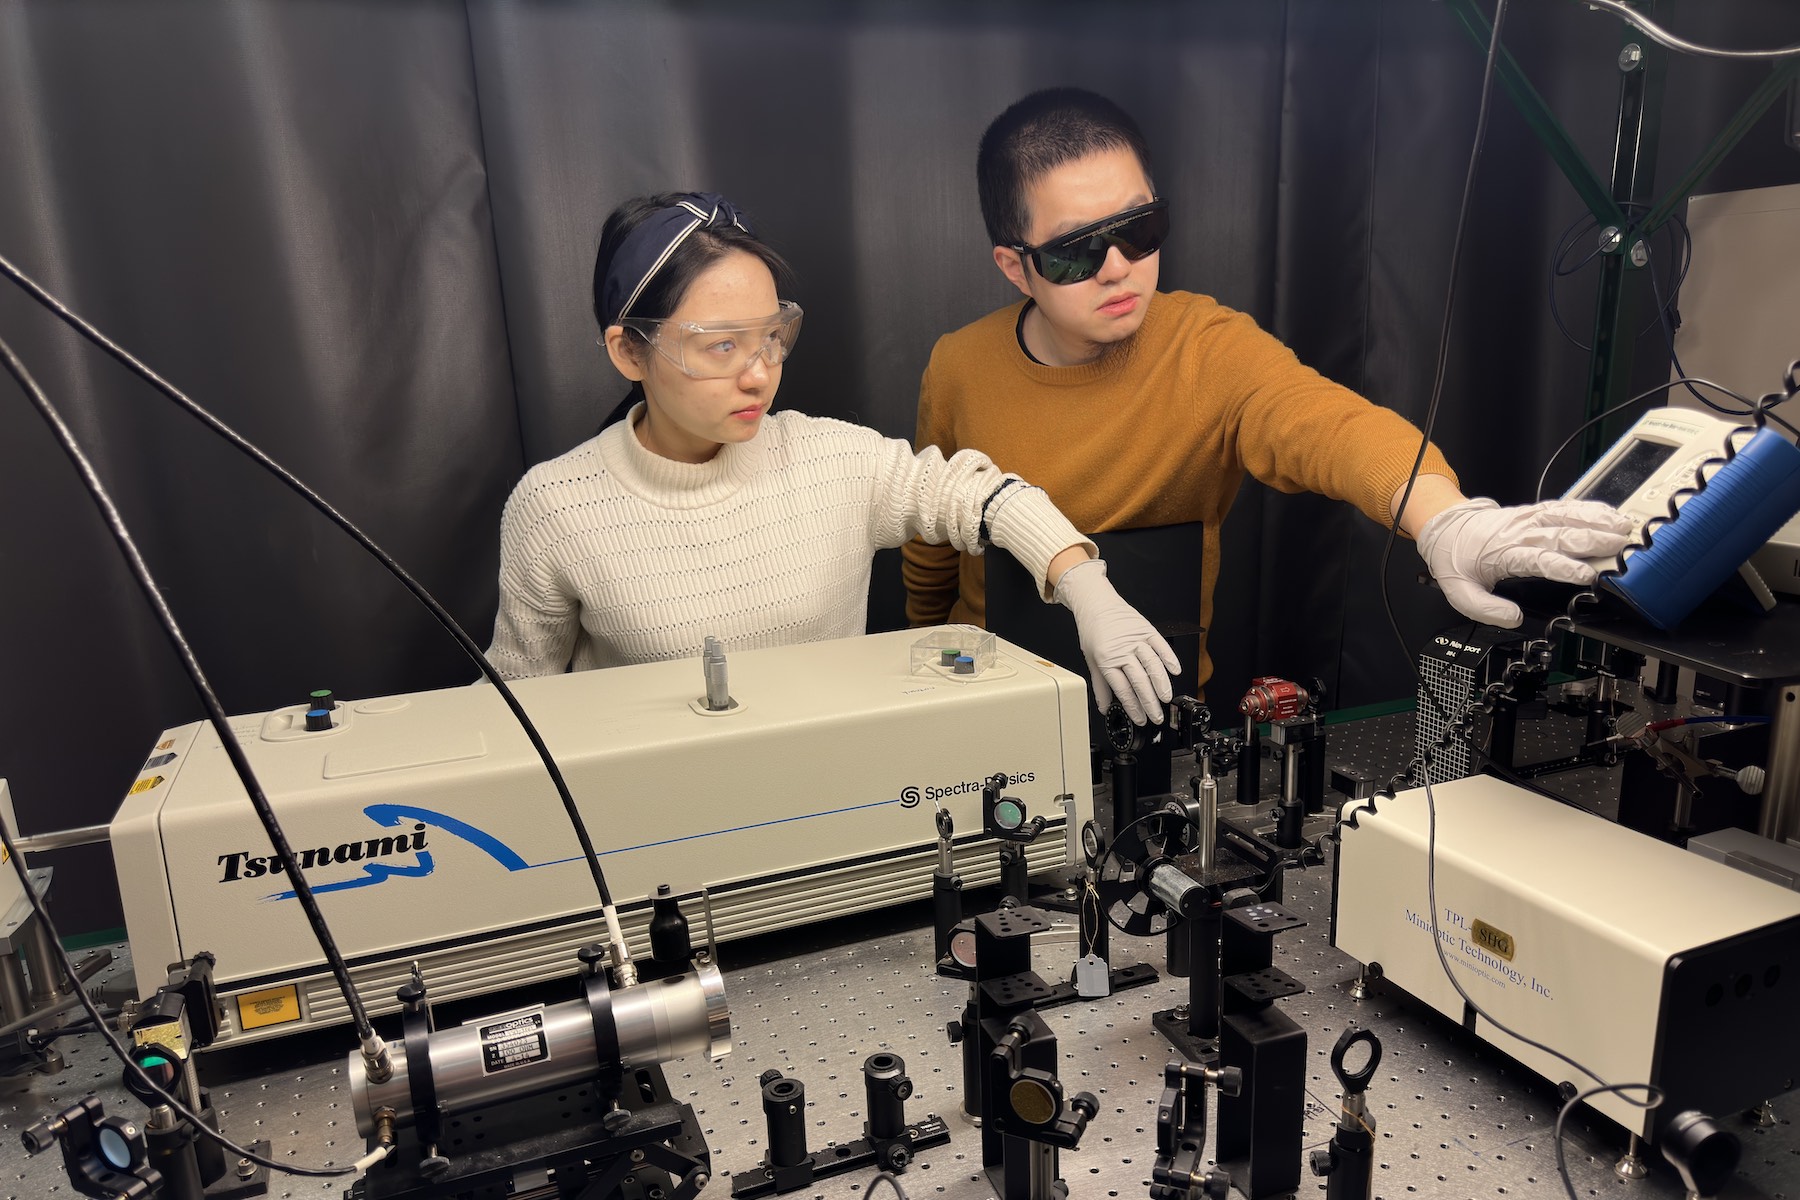 University of Minnesota Twin Cities Ph.D. students Yingying Zhang and Chi Zhang conduct measurements using a home-built system involving ultrafast laser pulses to study the lanthanum strontium cobaltite devices